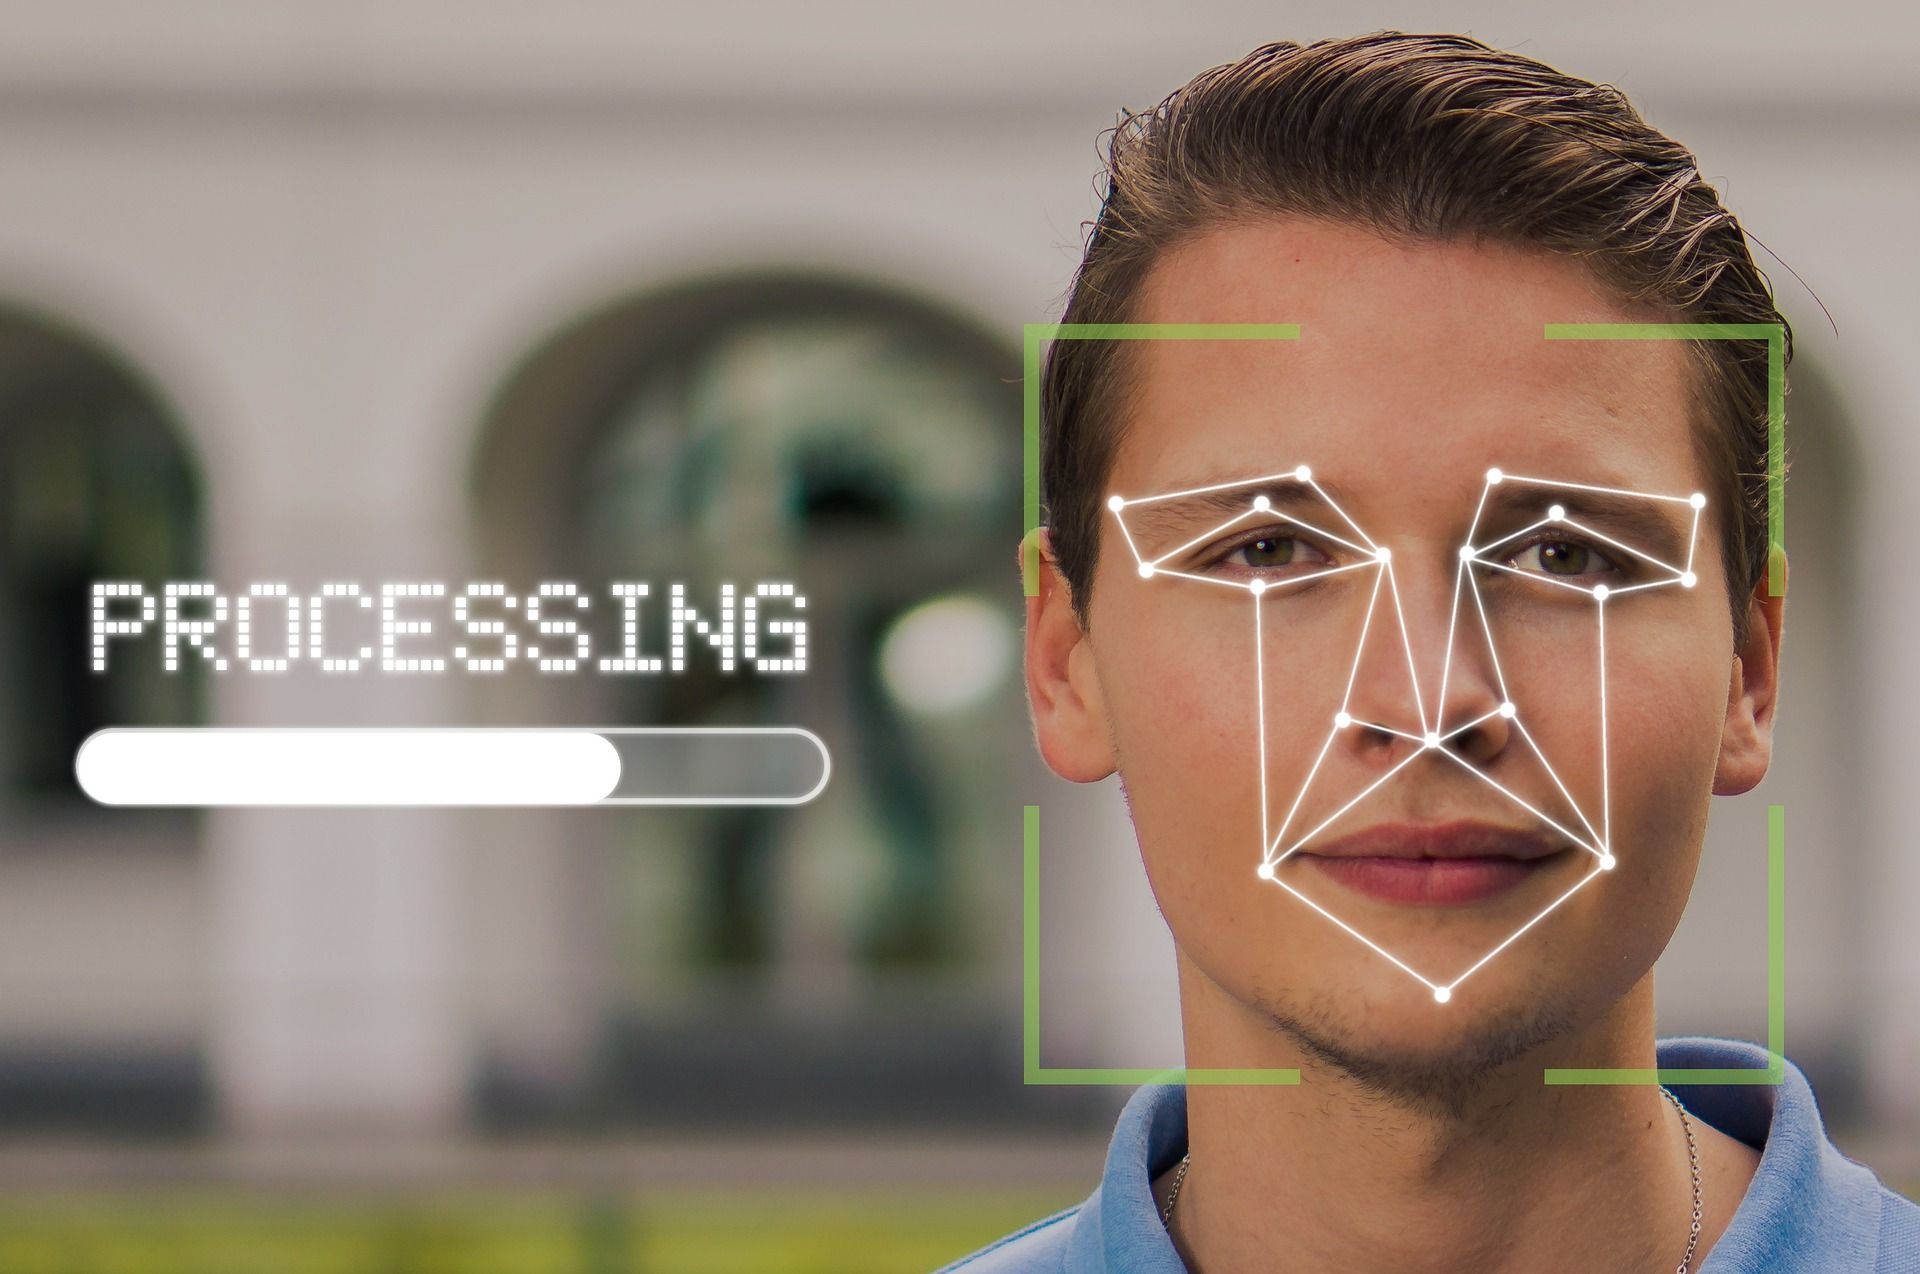 Facial recognition graphic